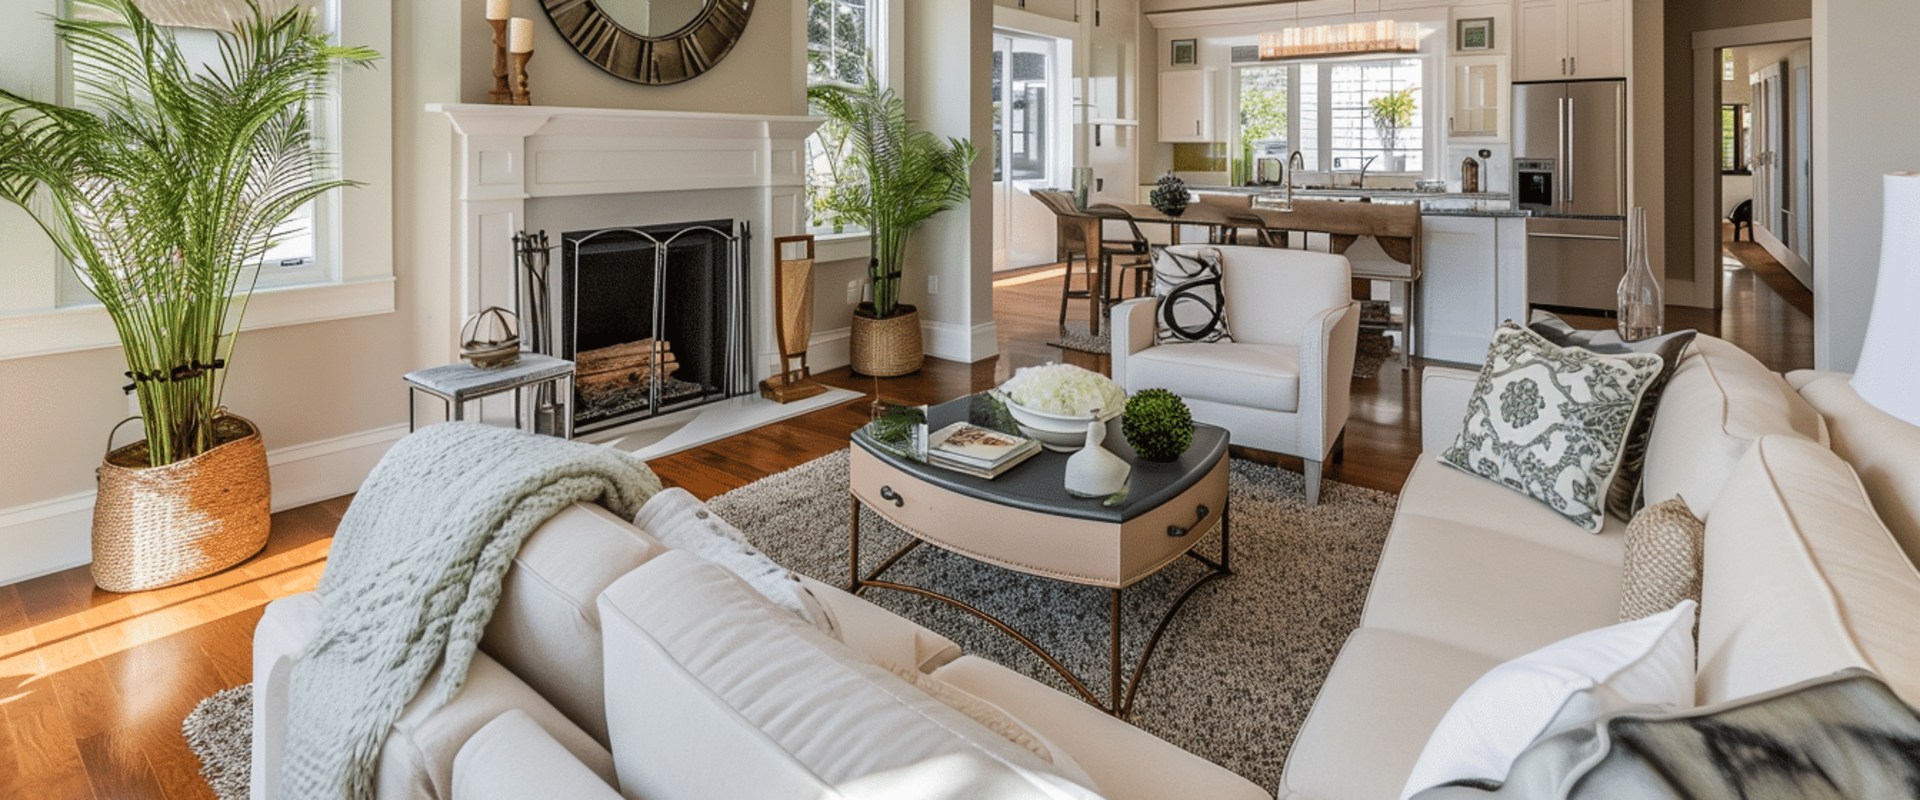 Maximizing Curb Appeal and Staging: Tips for Selling Your Home